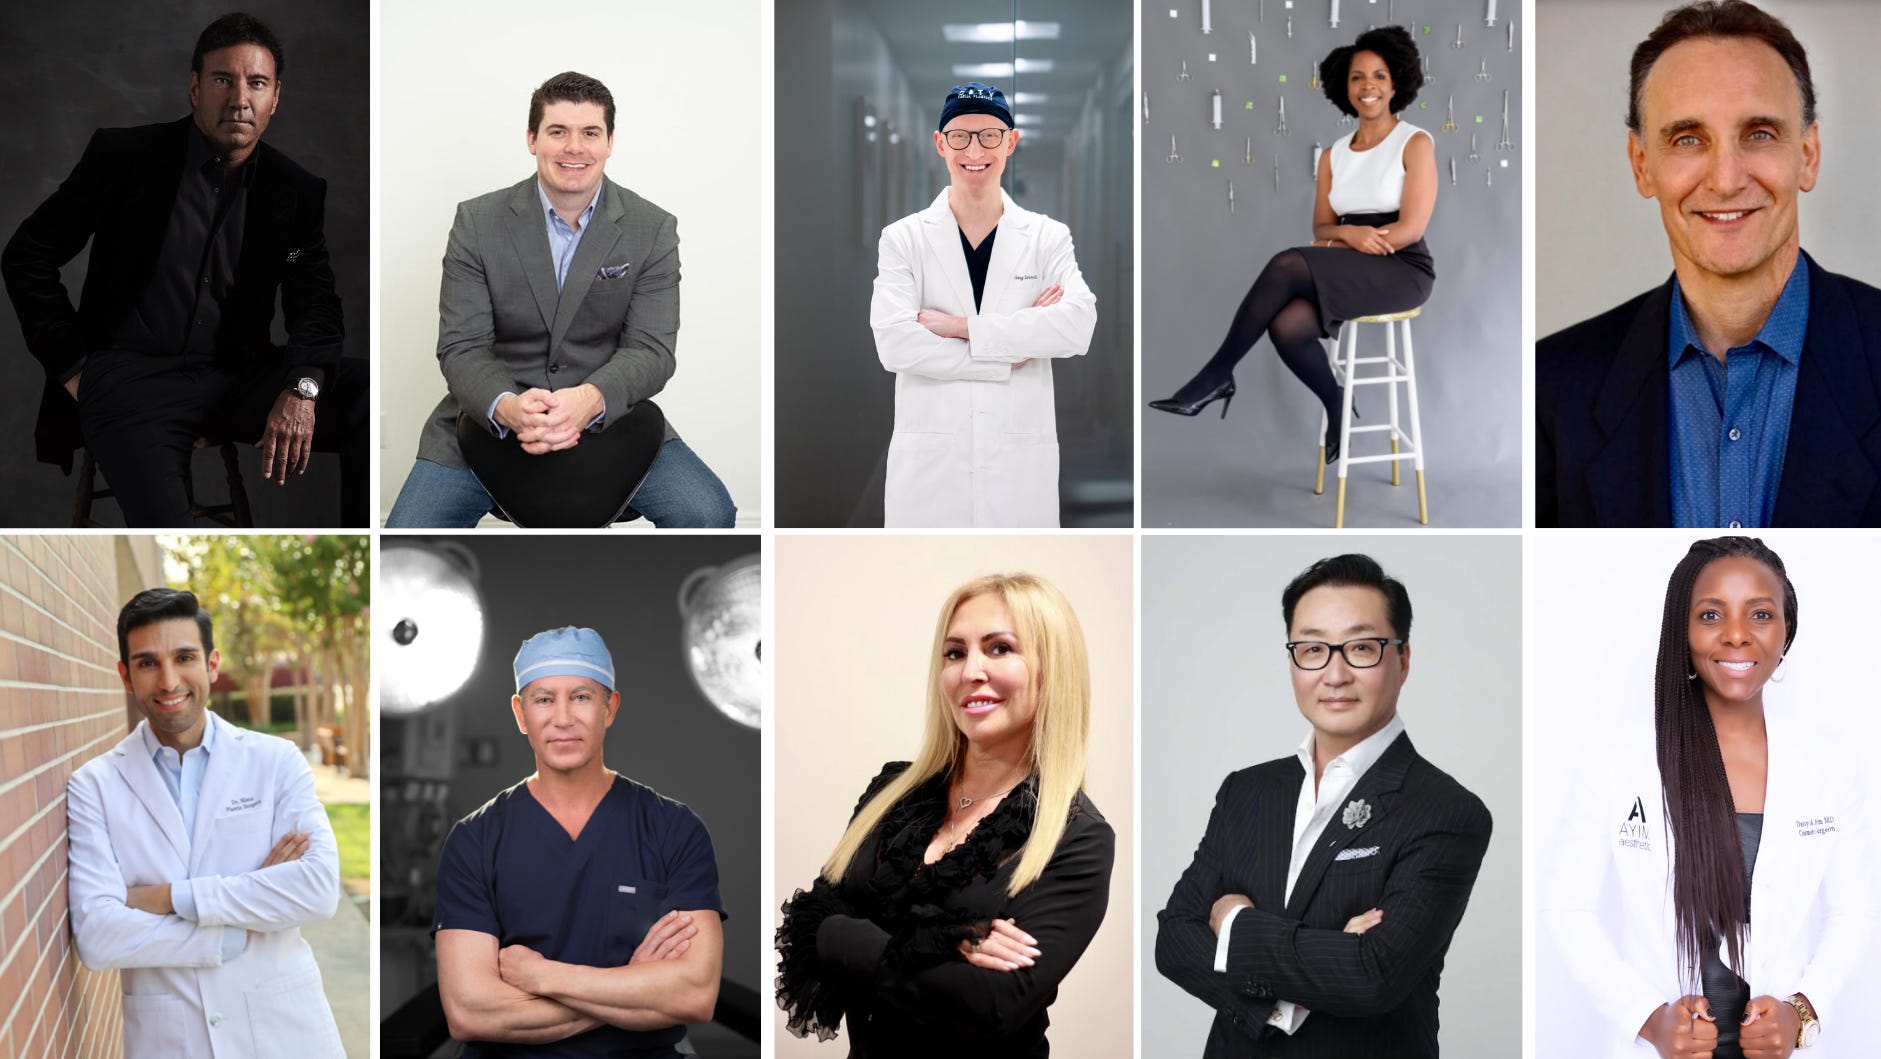 Top 10 plastic surgeons in reconstruction and body modification